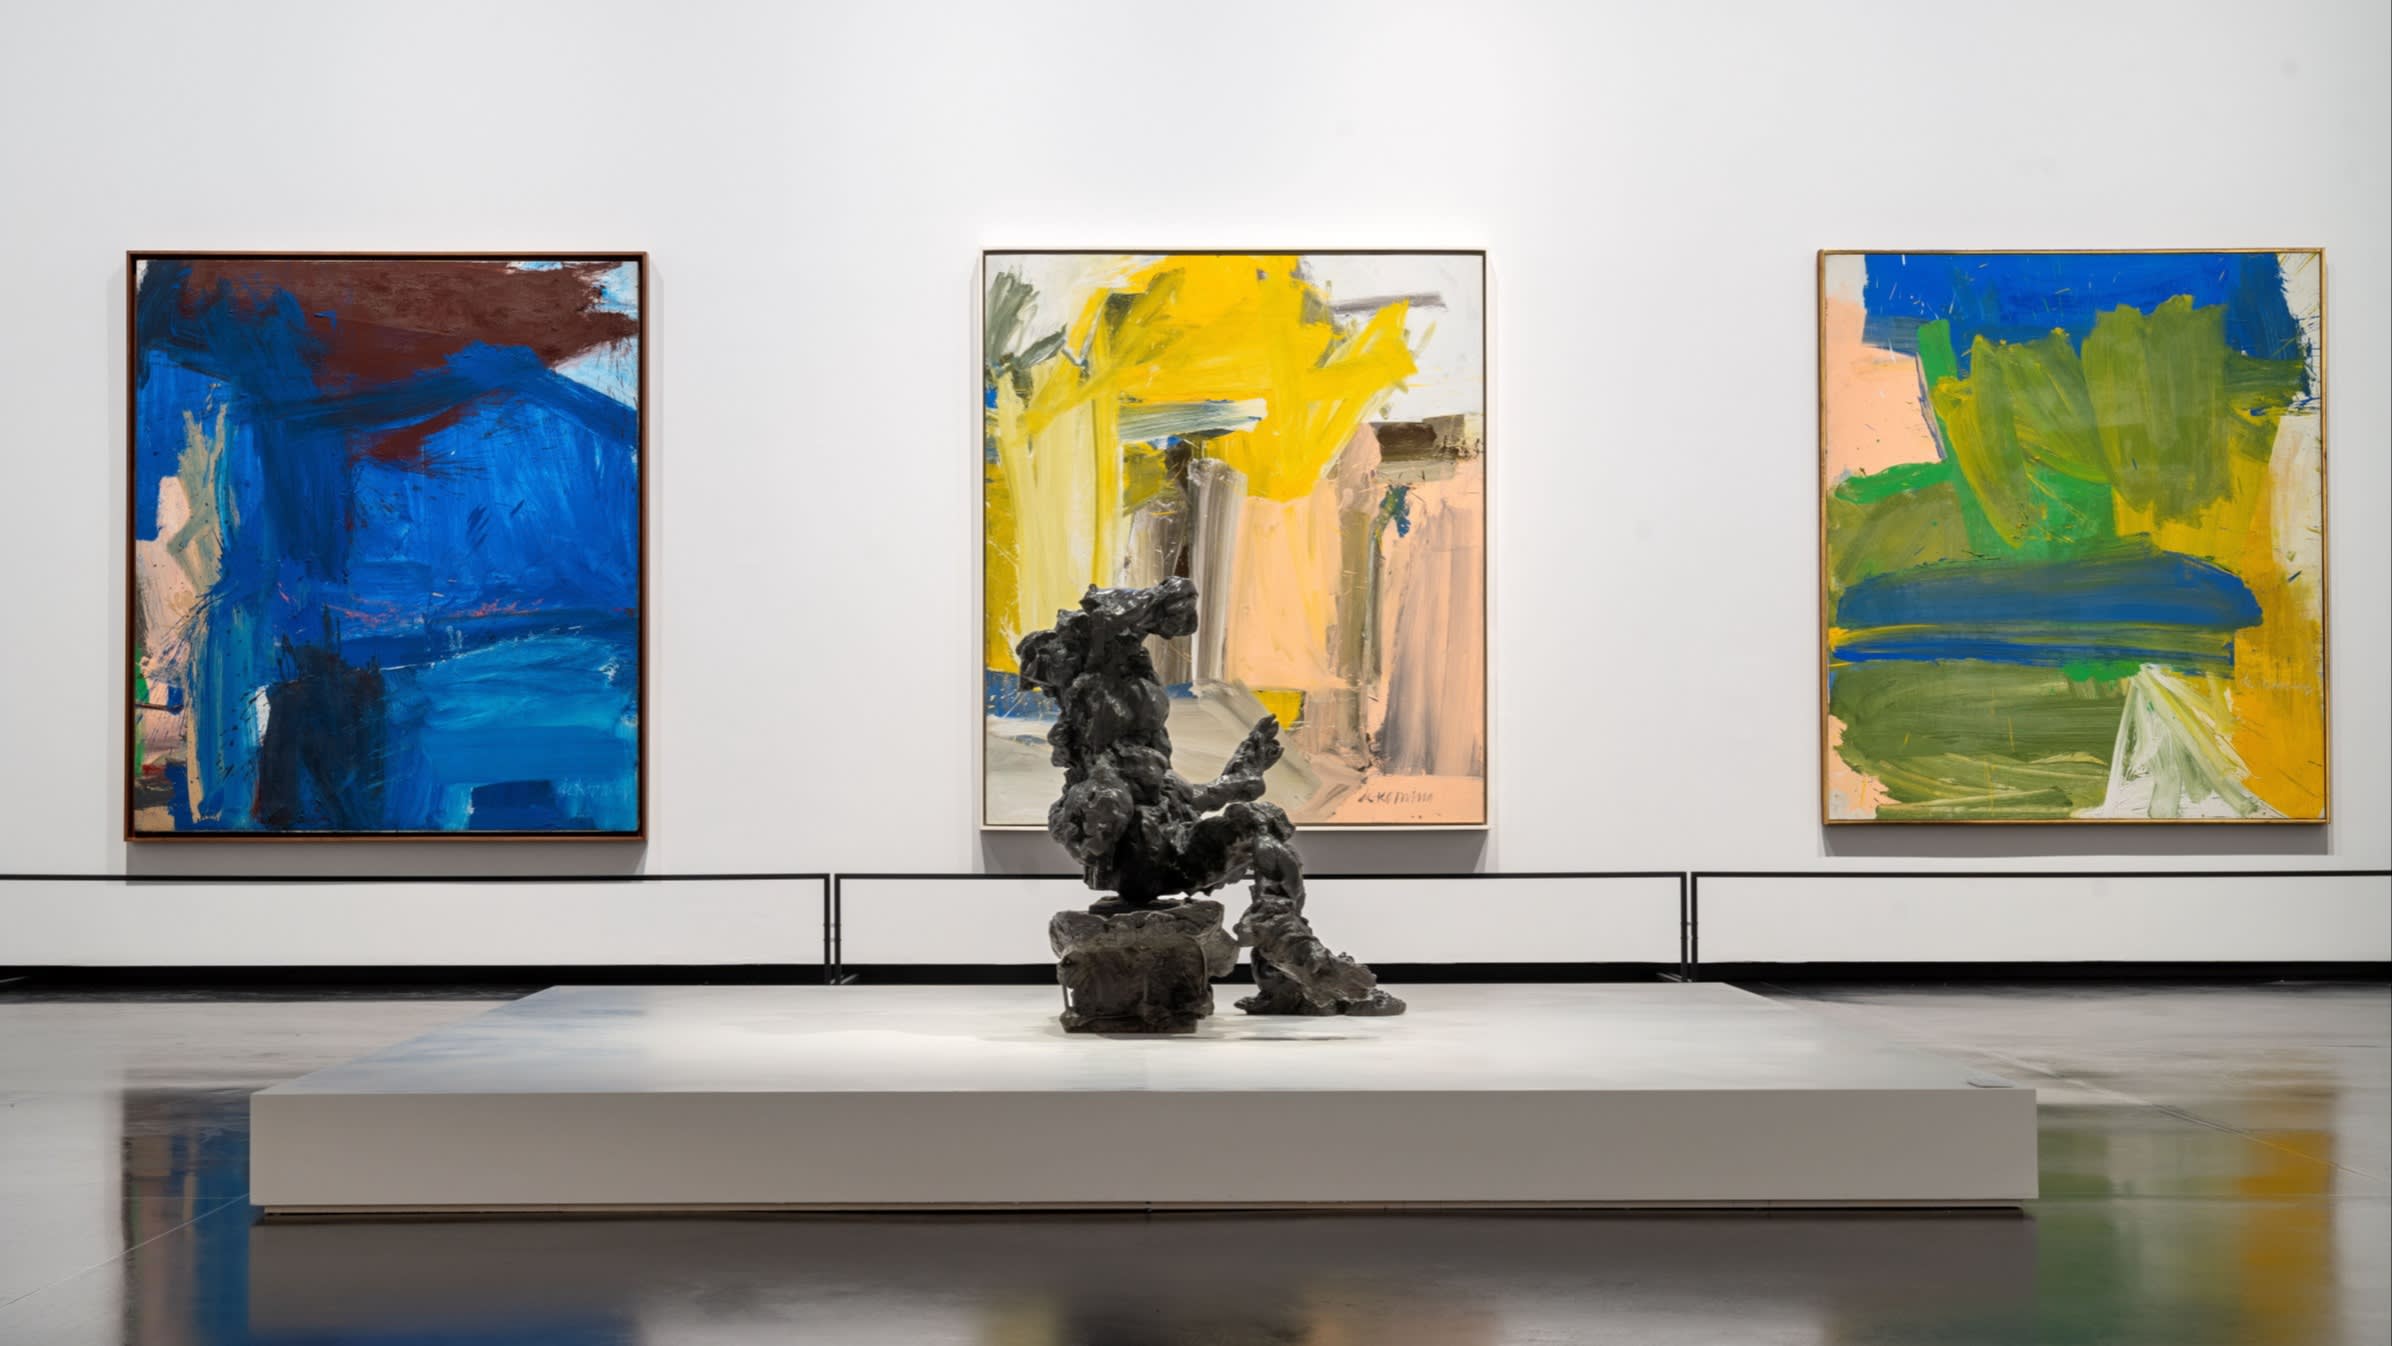 A view of a sculpture and a painting in a gallery